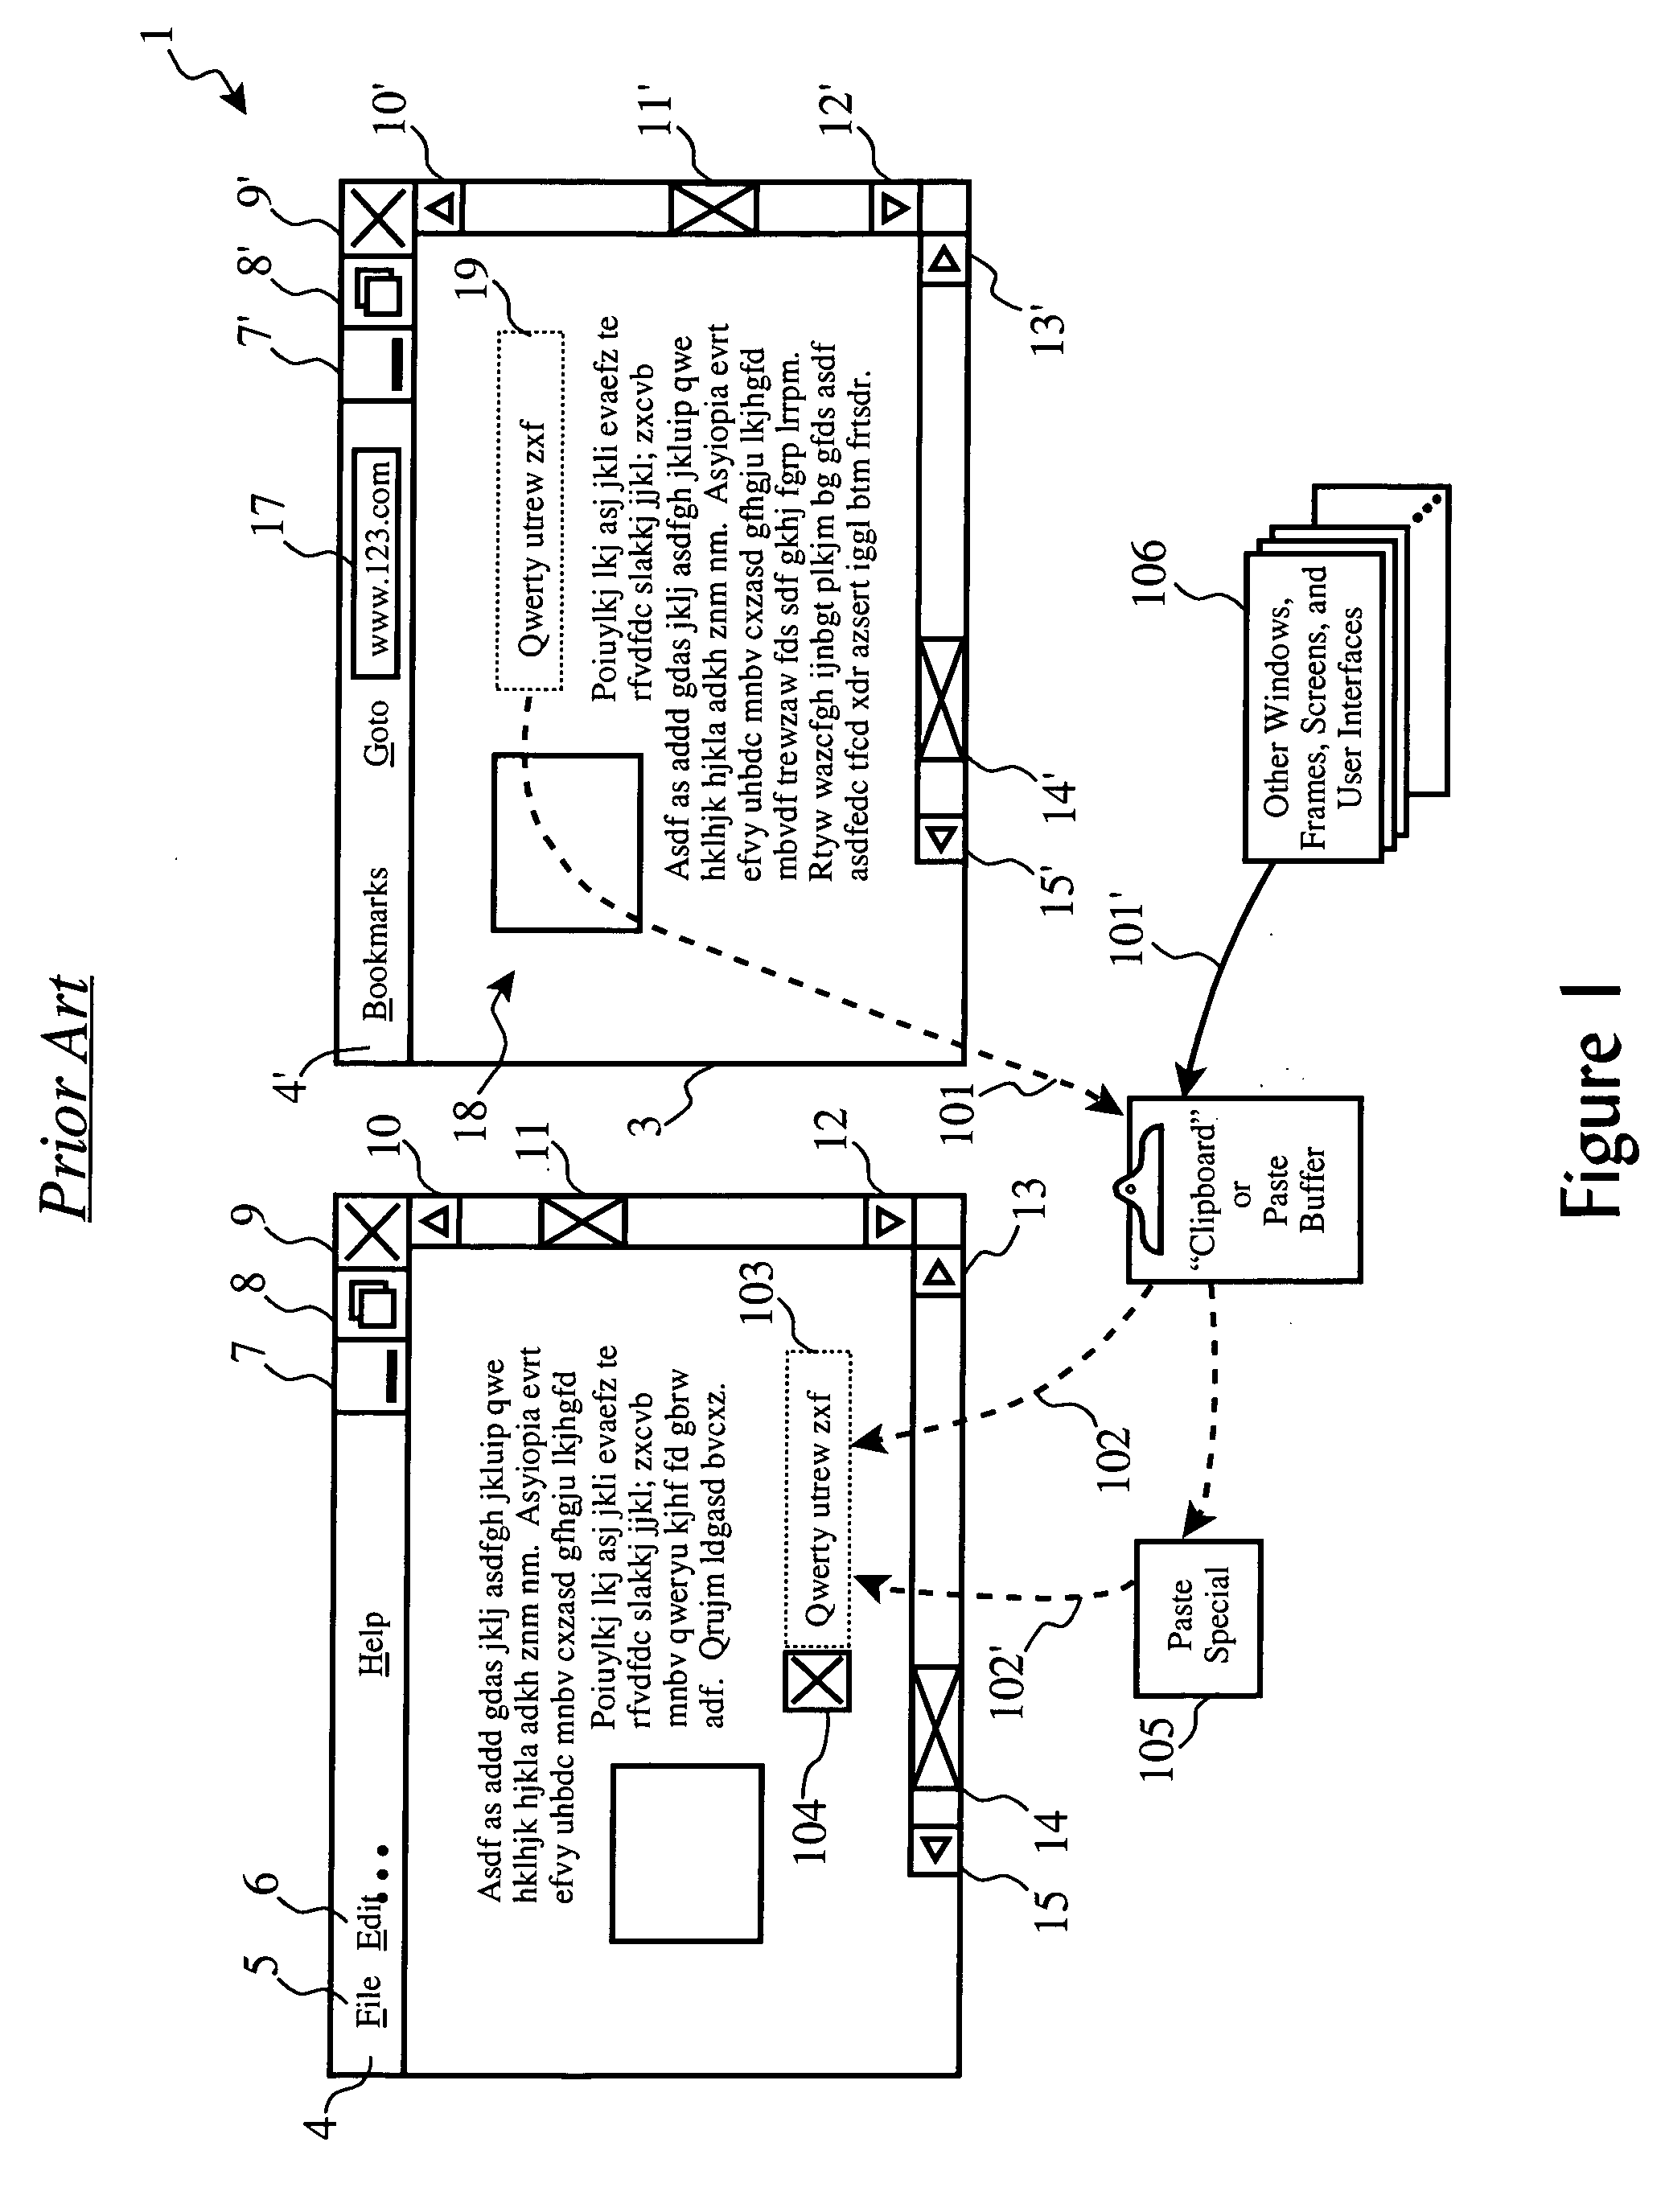 System and method for automatic information compatibility detection and pasting intervention